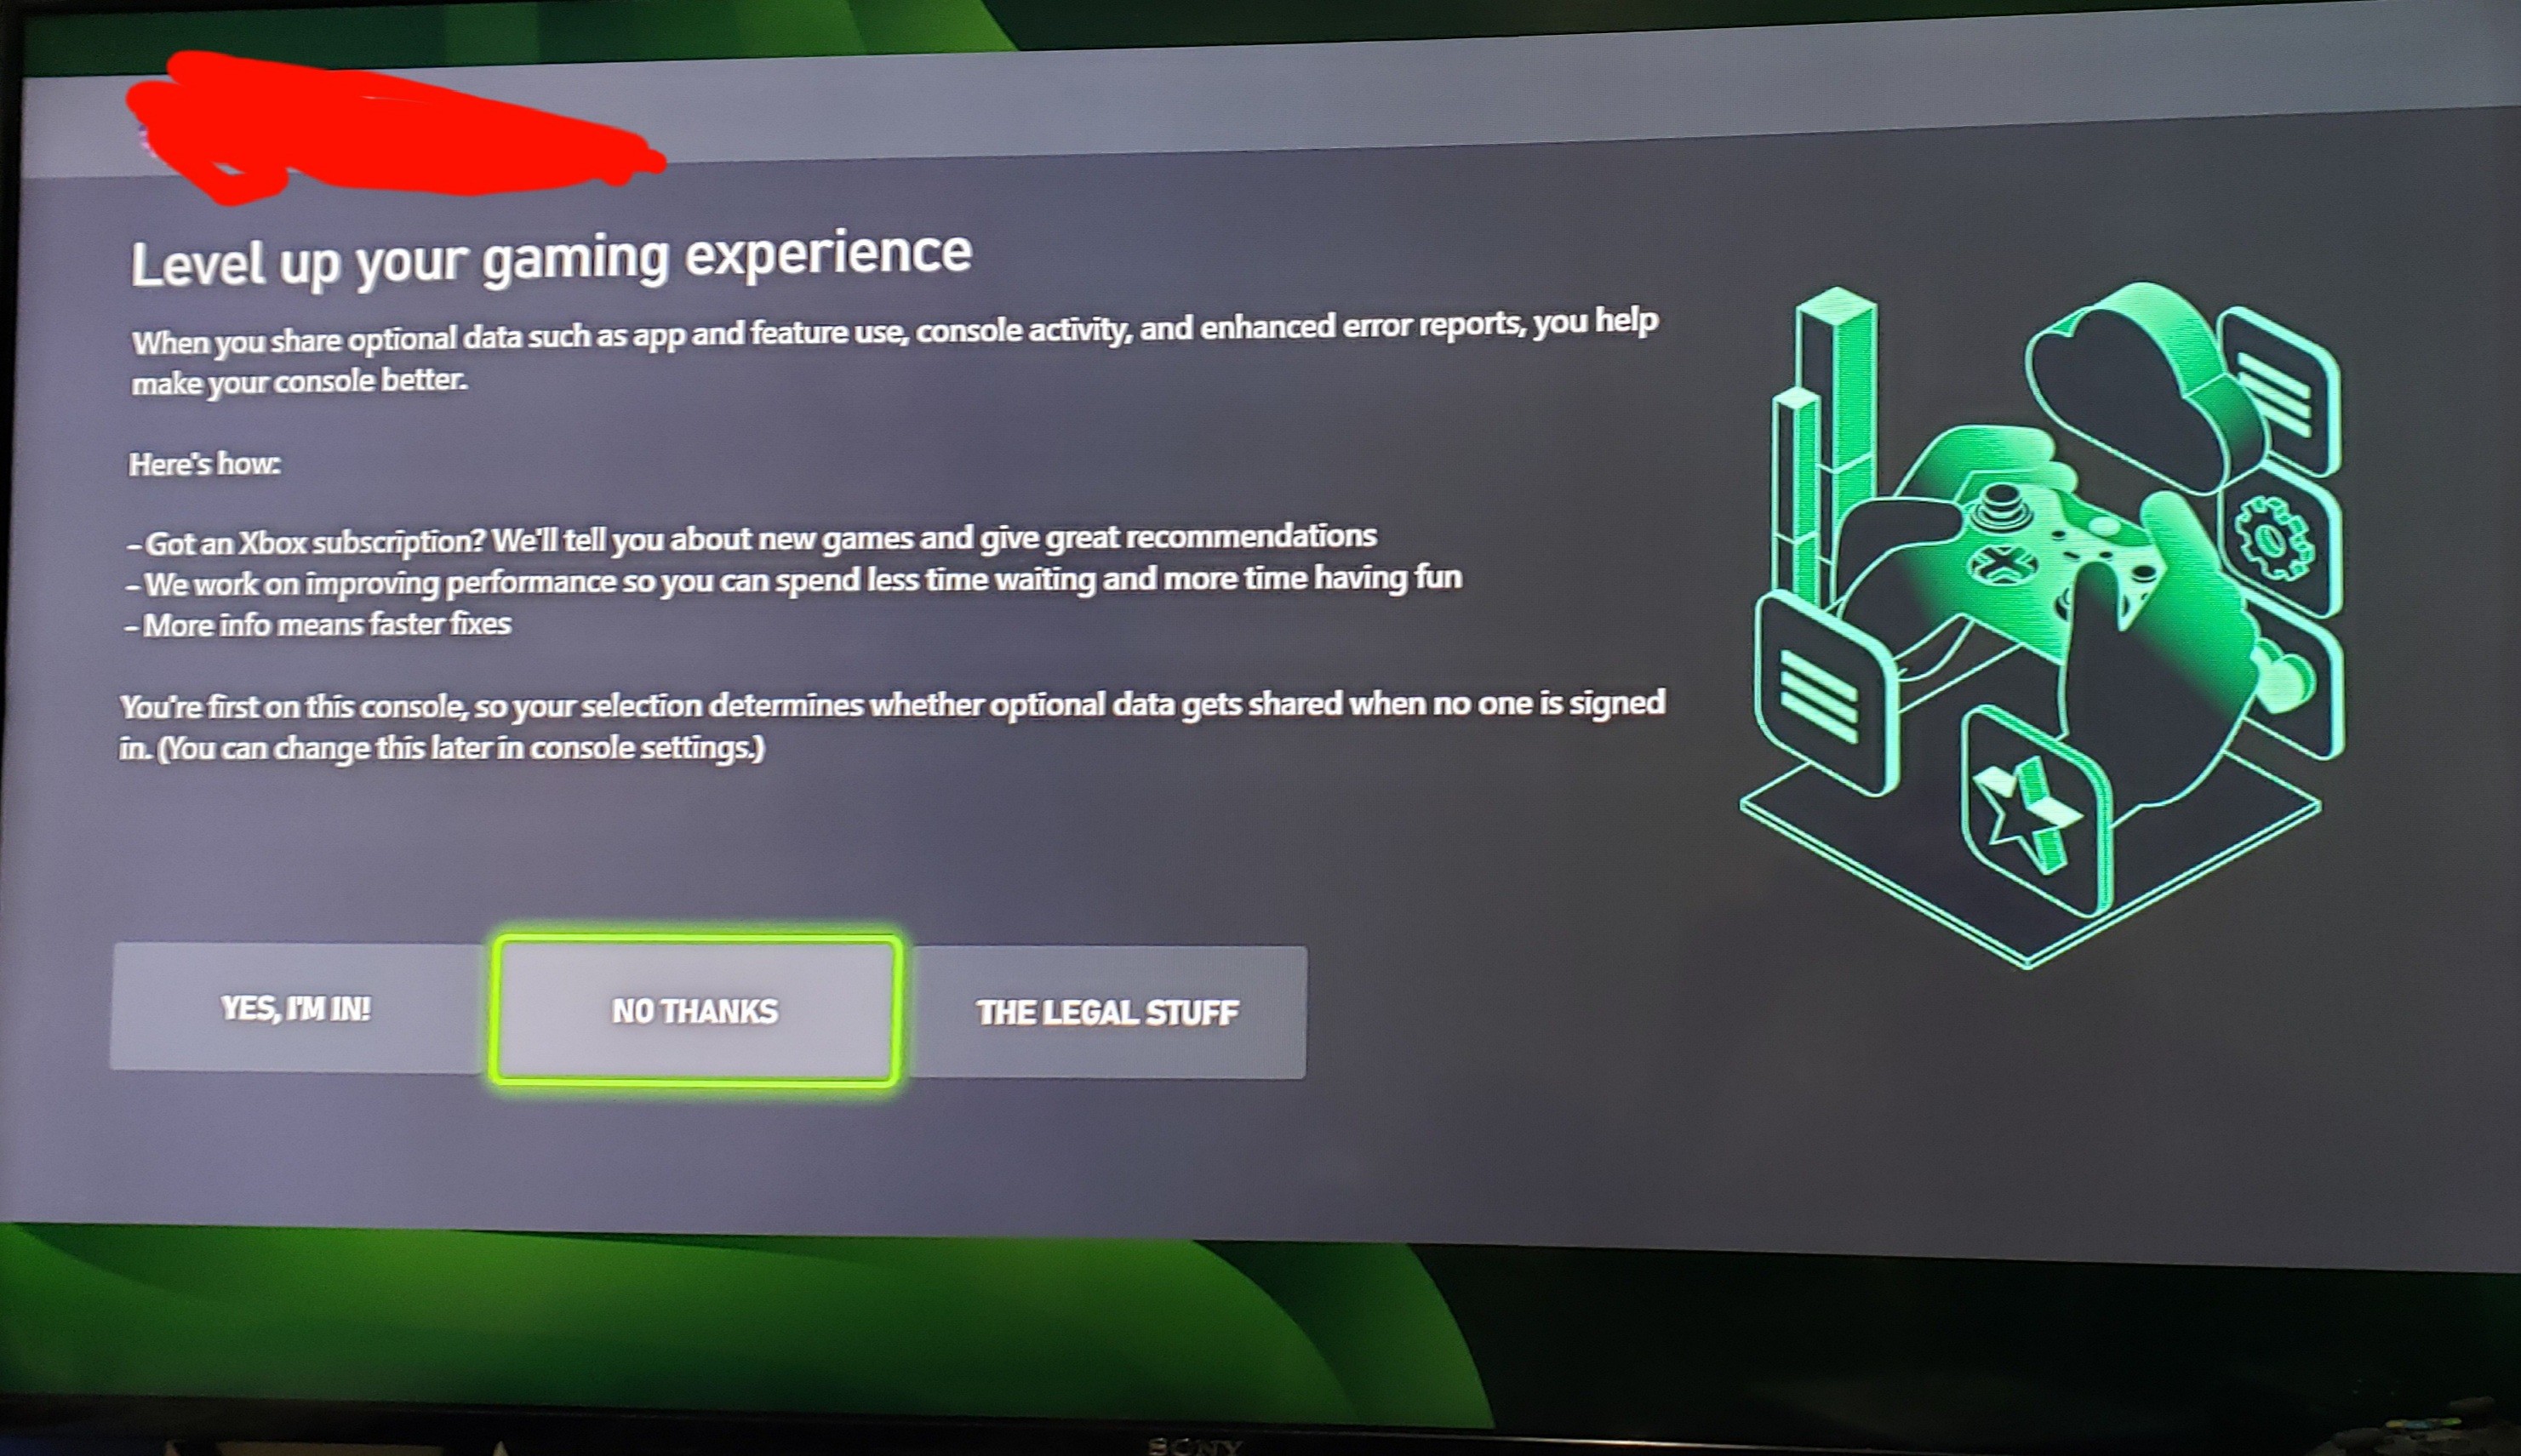 How do I get the "Level Up Your Gaming Experience" message to stop showing up every time I... [​IMG]